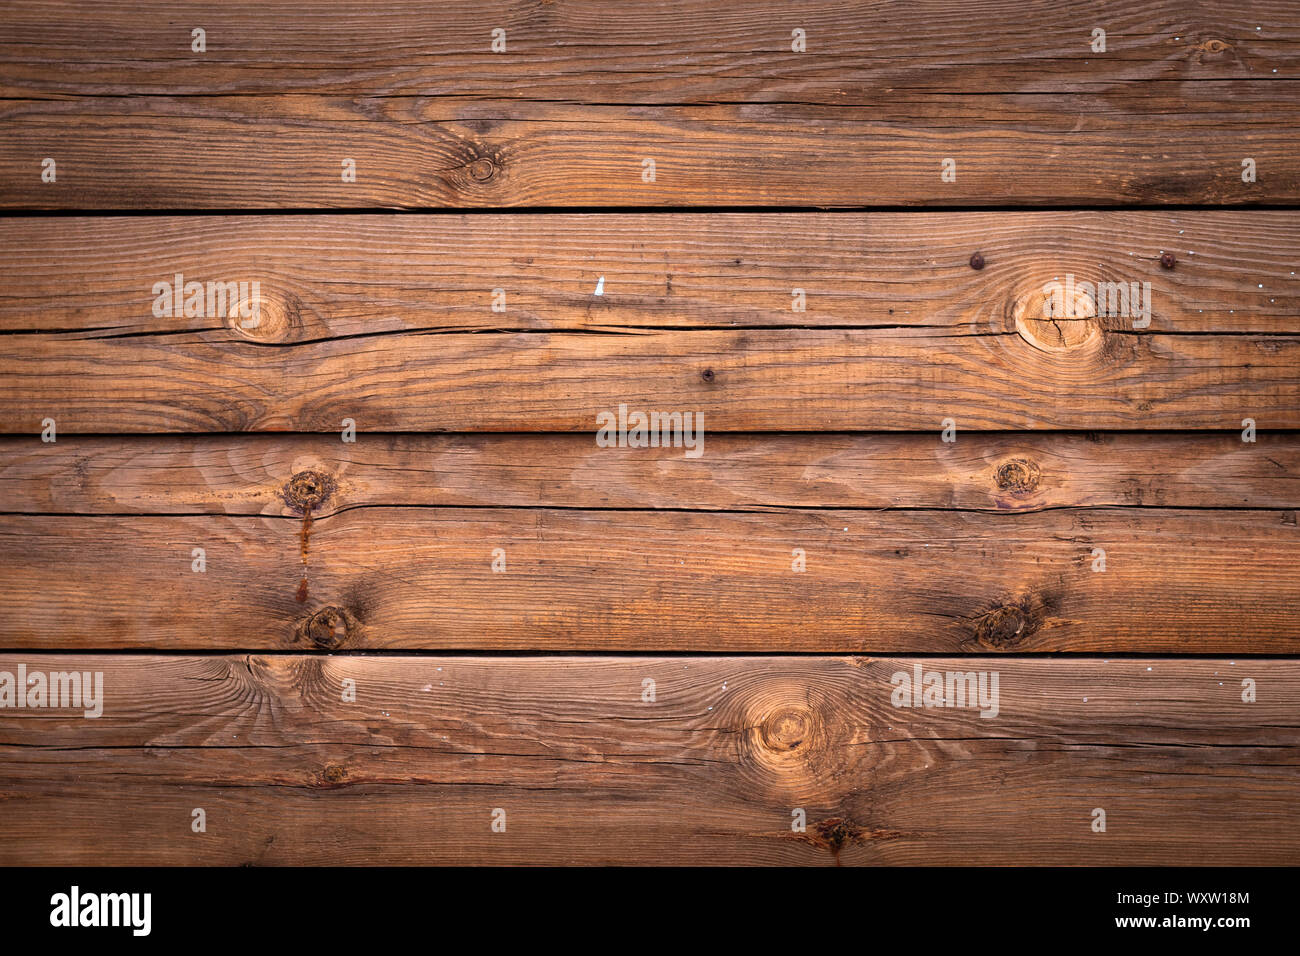 Rustic wood timber background. Abstract natural design. Pattern of old wooden planks. Table of oak. Shabby wood texture. Vintage wooden fence, desk Stock Photo